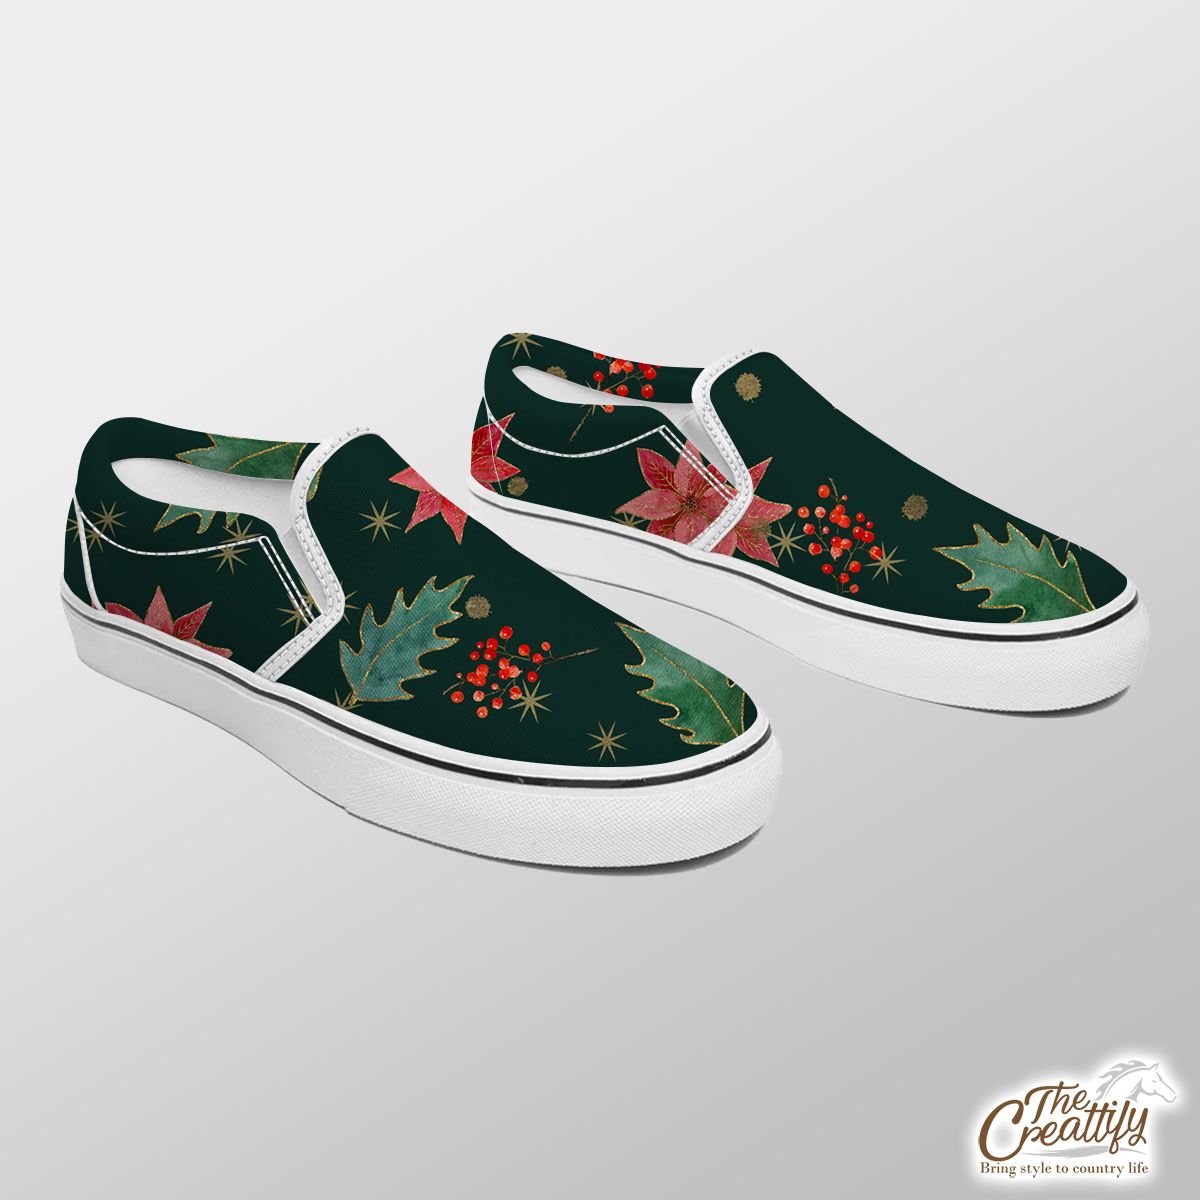 Poinsettias For Christmas And Holly Leaf Pattern Slip On Sneakers